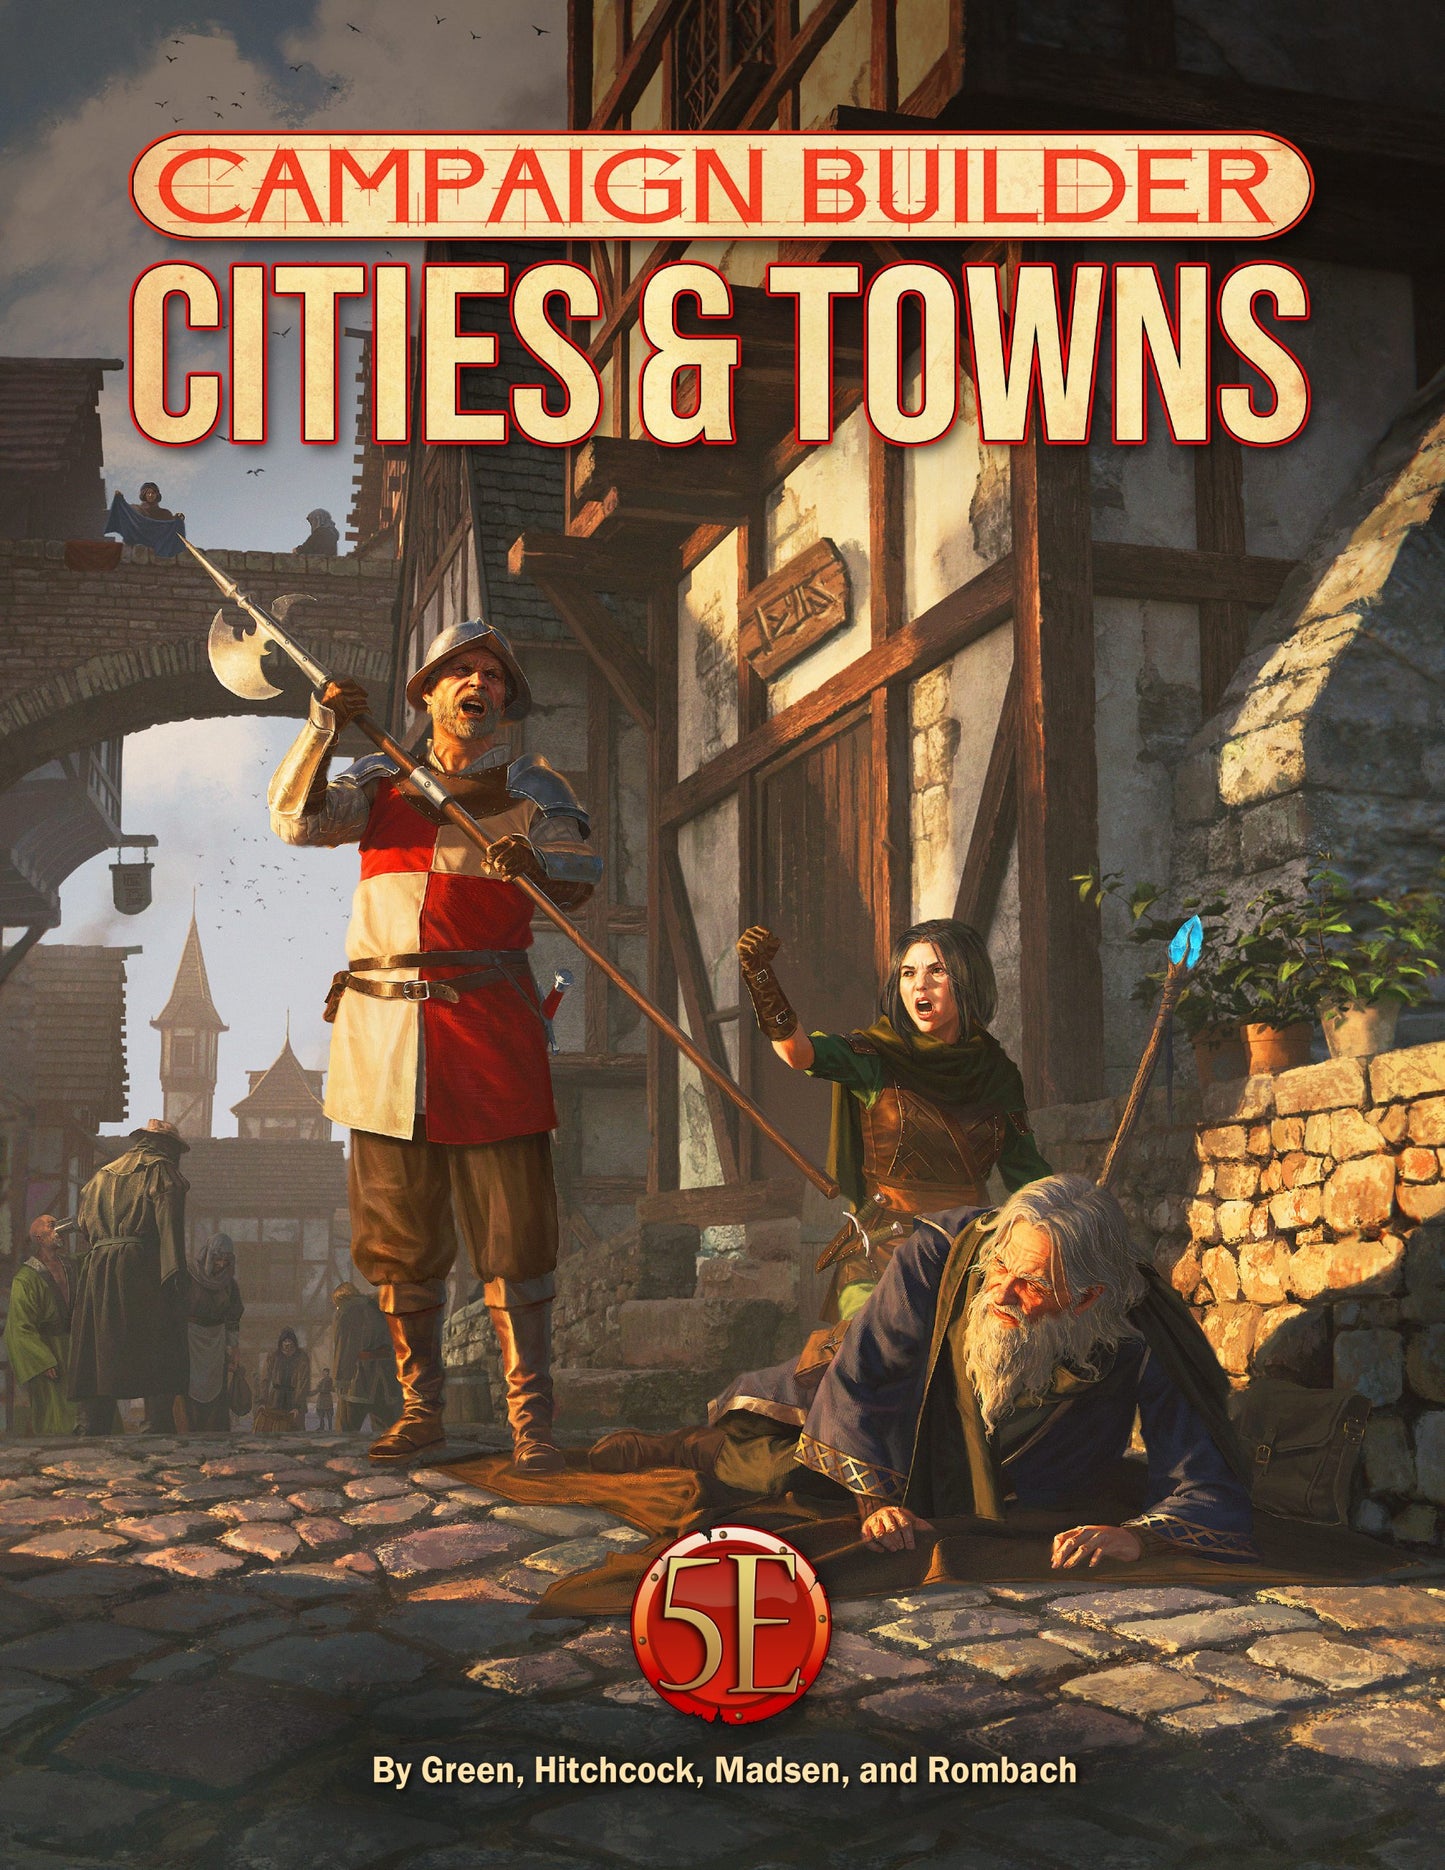 CAMPAIGN BUILDER CITIES & TOWNS